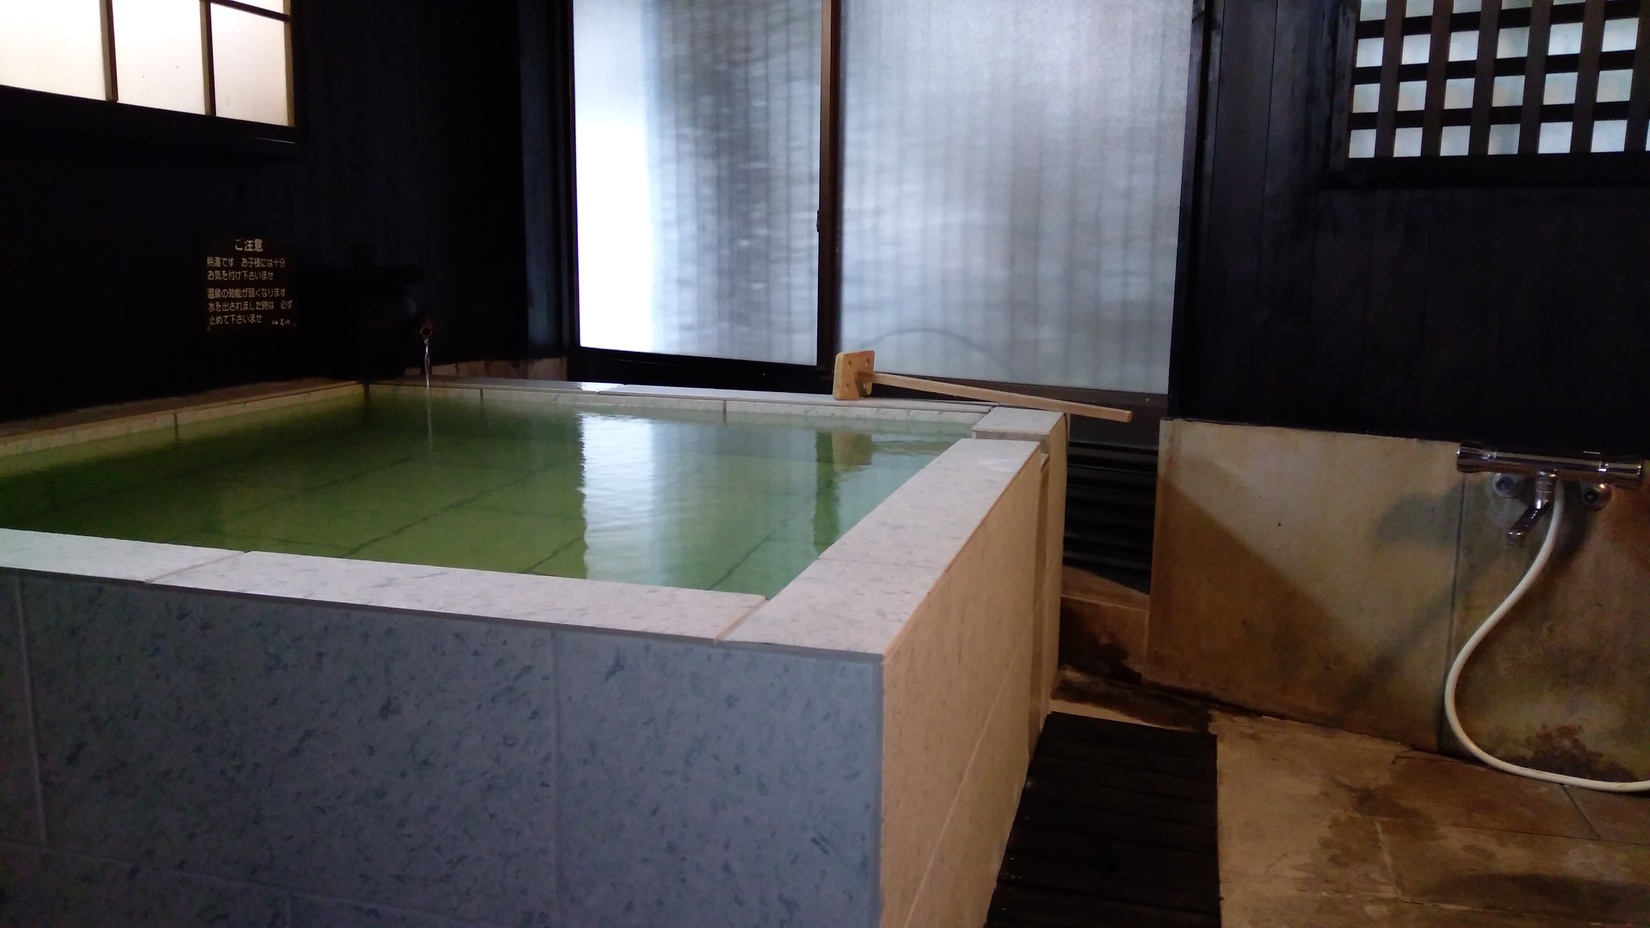 Kurokawa Onsen Oyado Kurokawa Kurokawa Onsen Oyado Kurokawa is a popular choice amongst travelers in Minamioguni, whether exploring or just passing through. The property offers guests a range of services and amenities designed to 